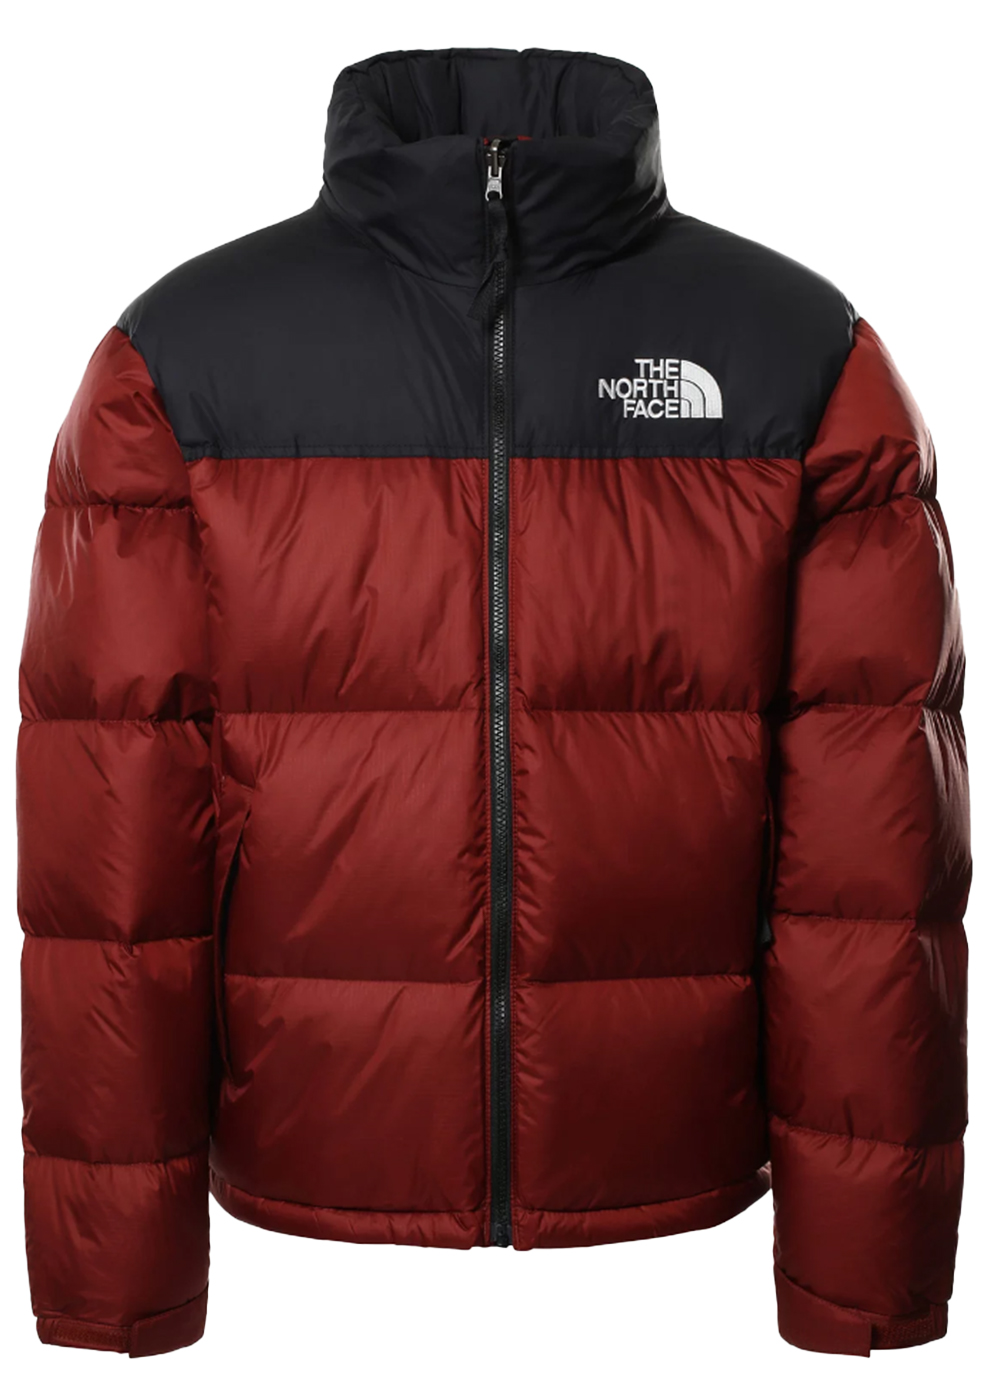 Buy & Sell Other Brands The North Face Streetwear Apparel